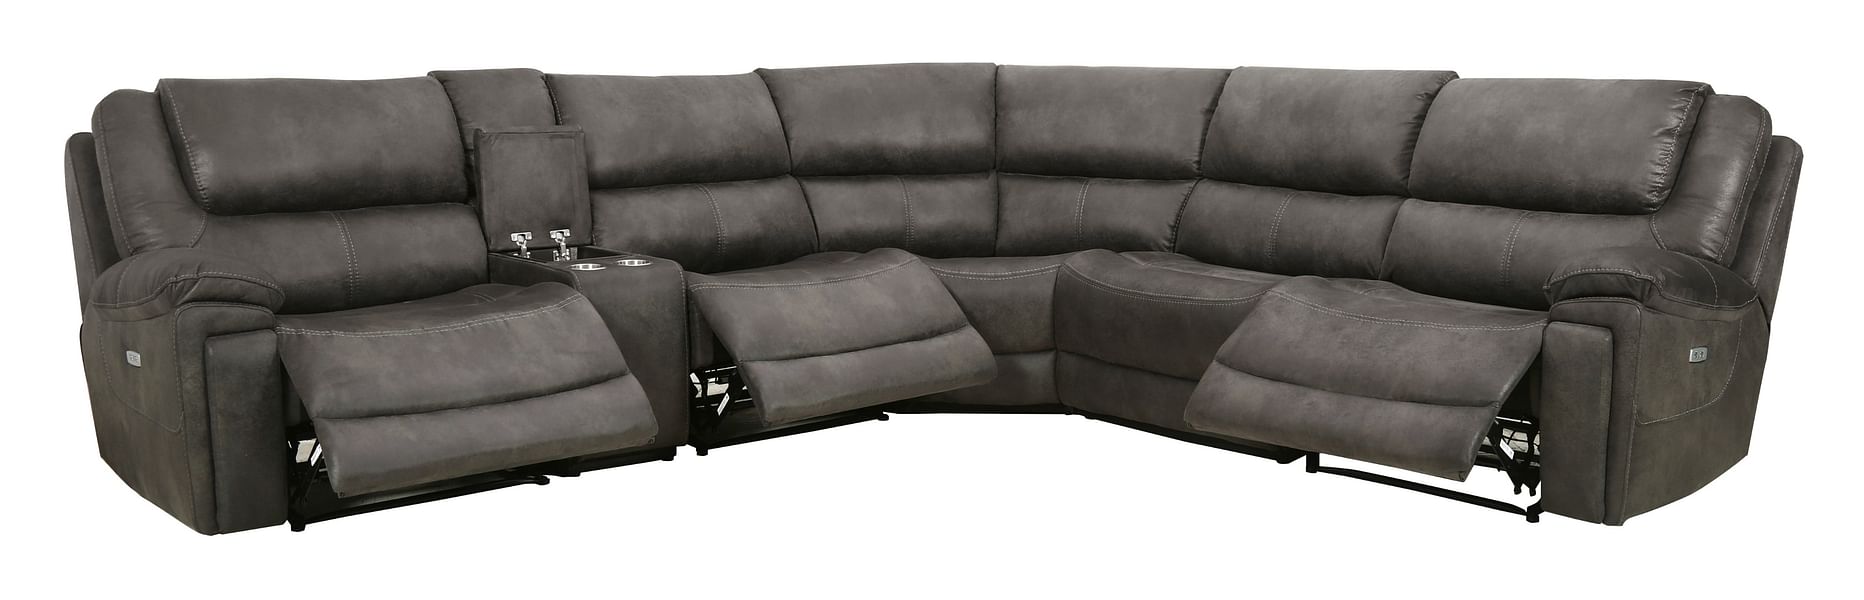 Wyerville 6 PC Sectional